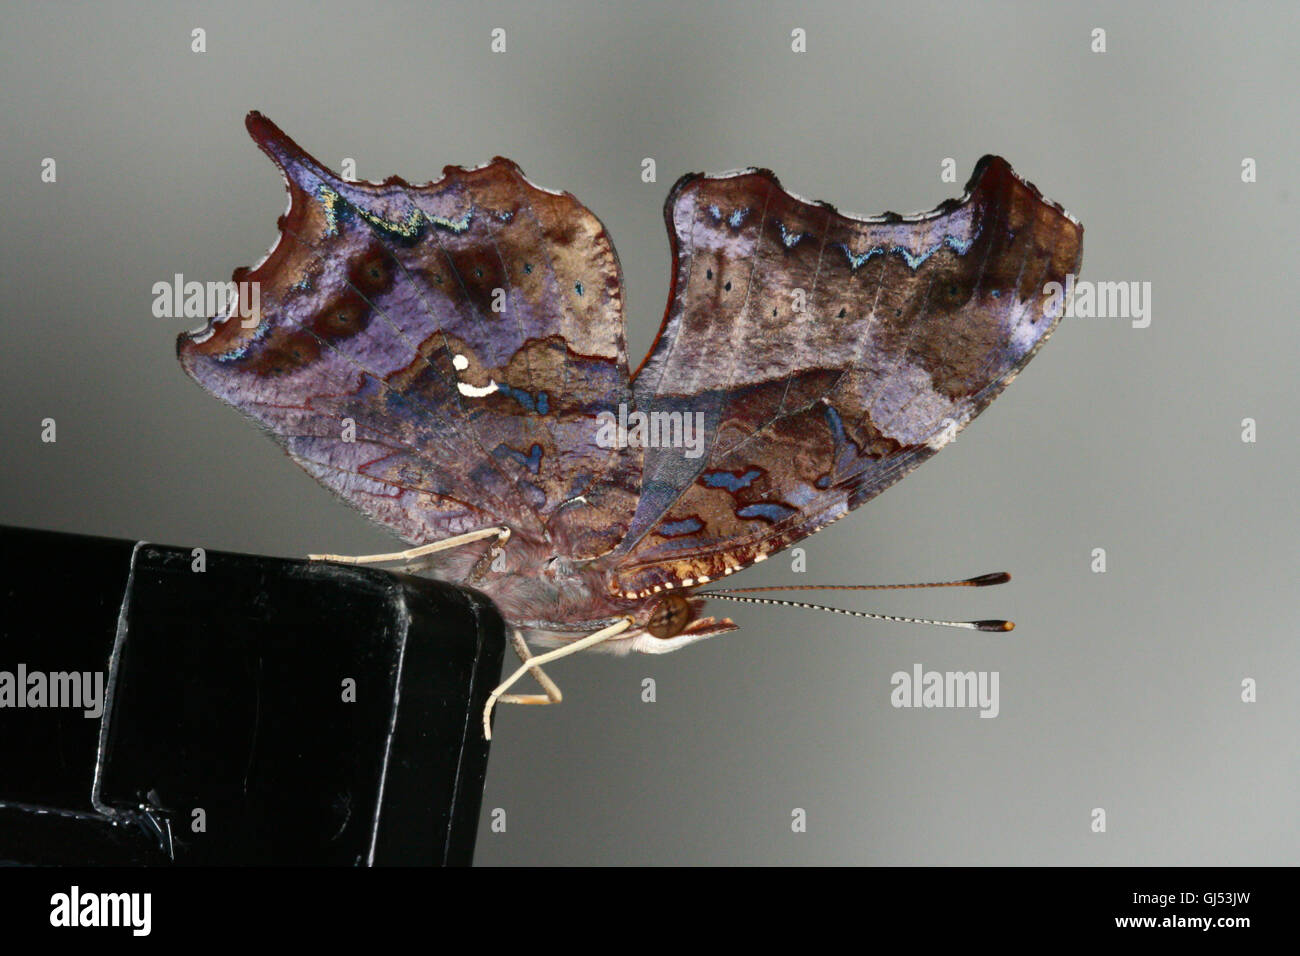 A freshly emerged/eclosed Question Mark butterfly (Polygonia interrogationis) sitting on an aquarium lid, Indiana, United States Stock Photo